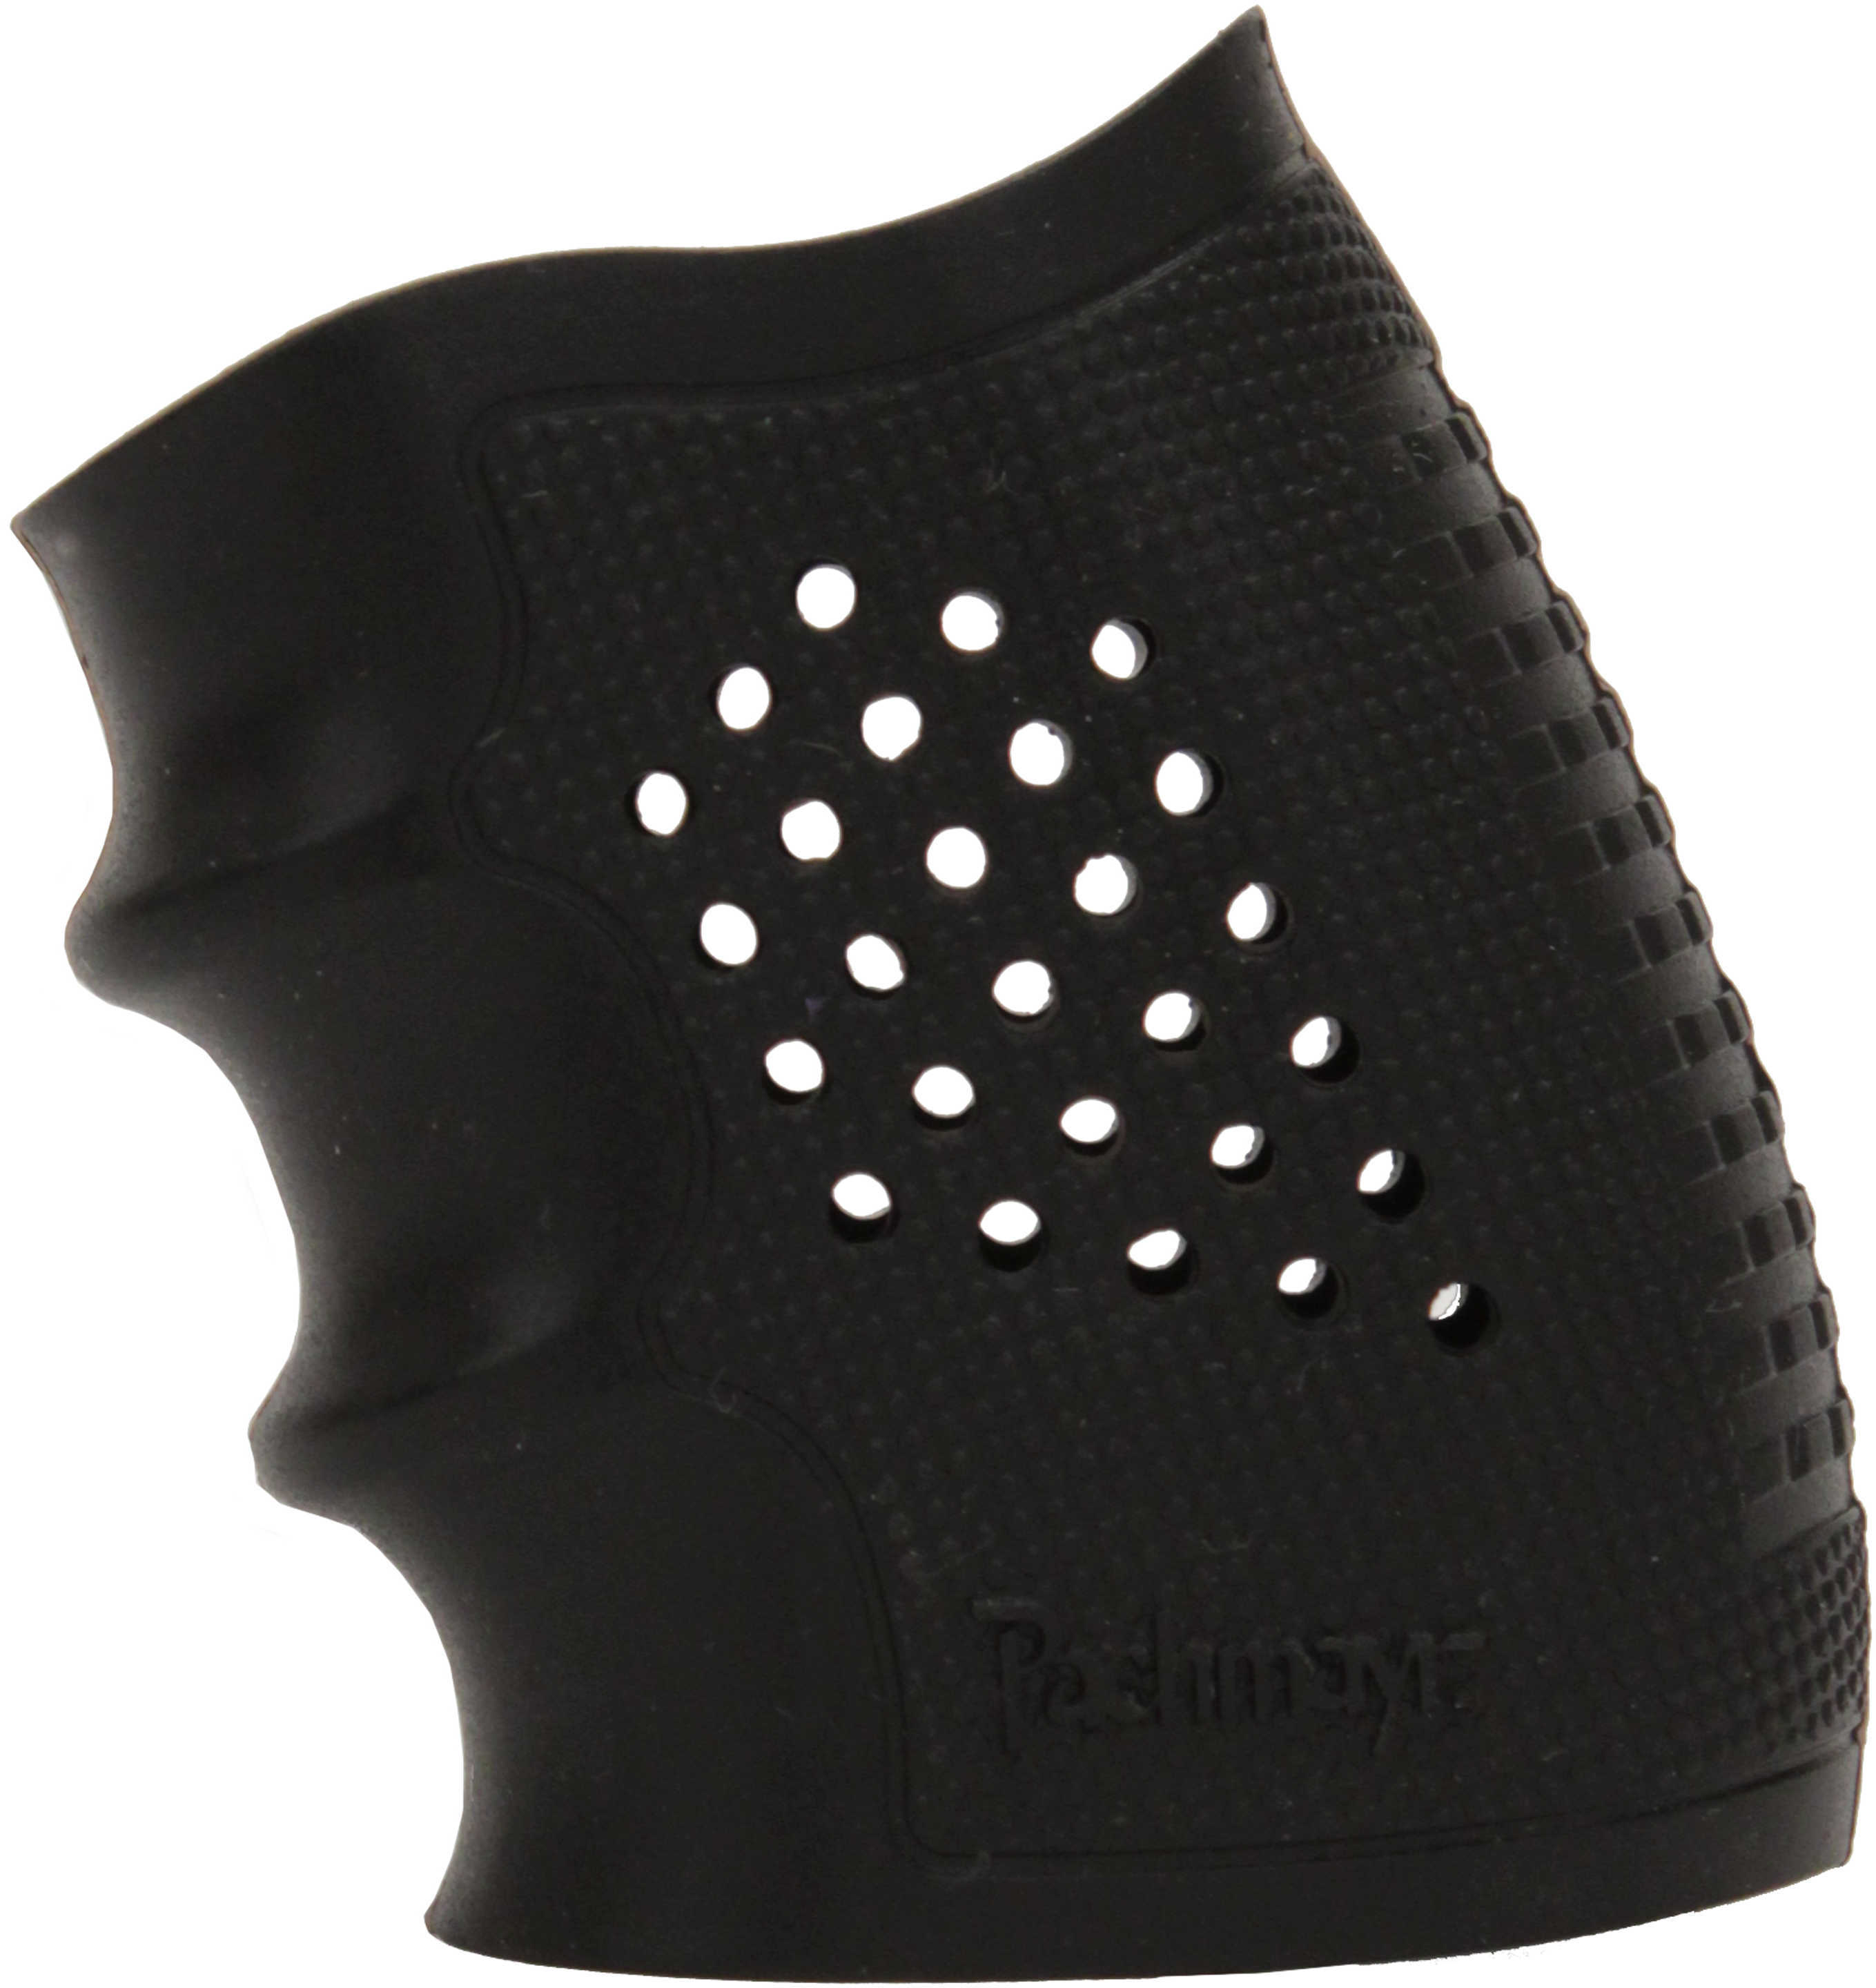 Pachmayr Tactical Grip Gloves - S&W M&P Series